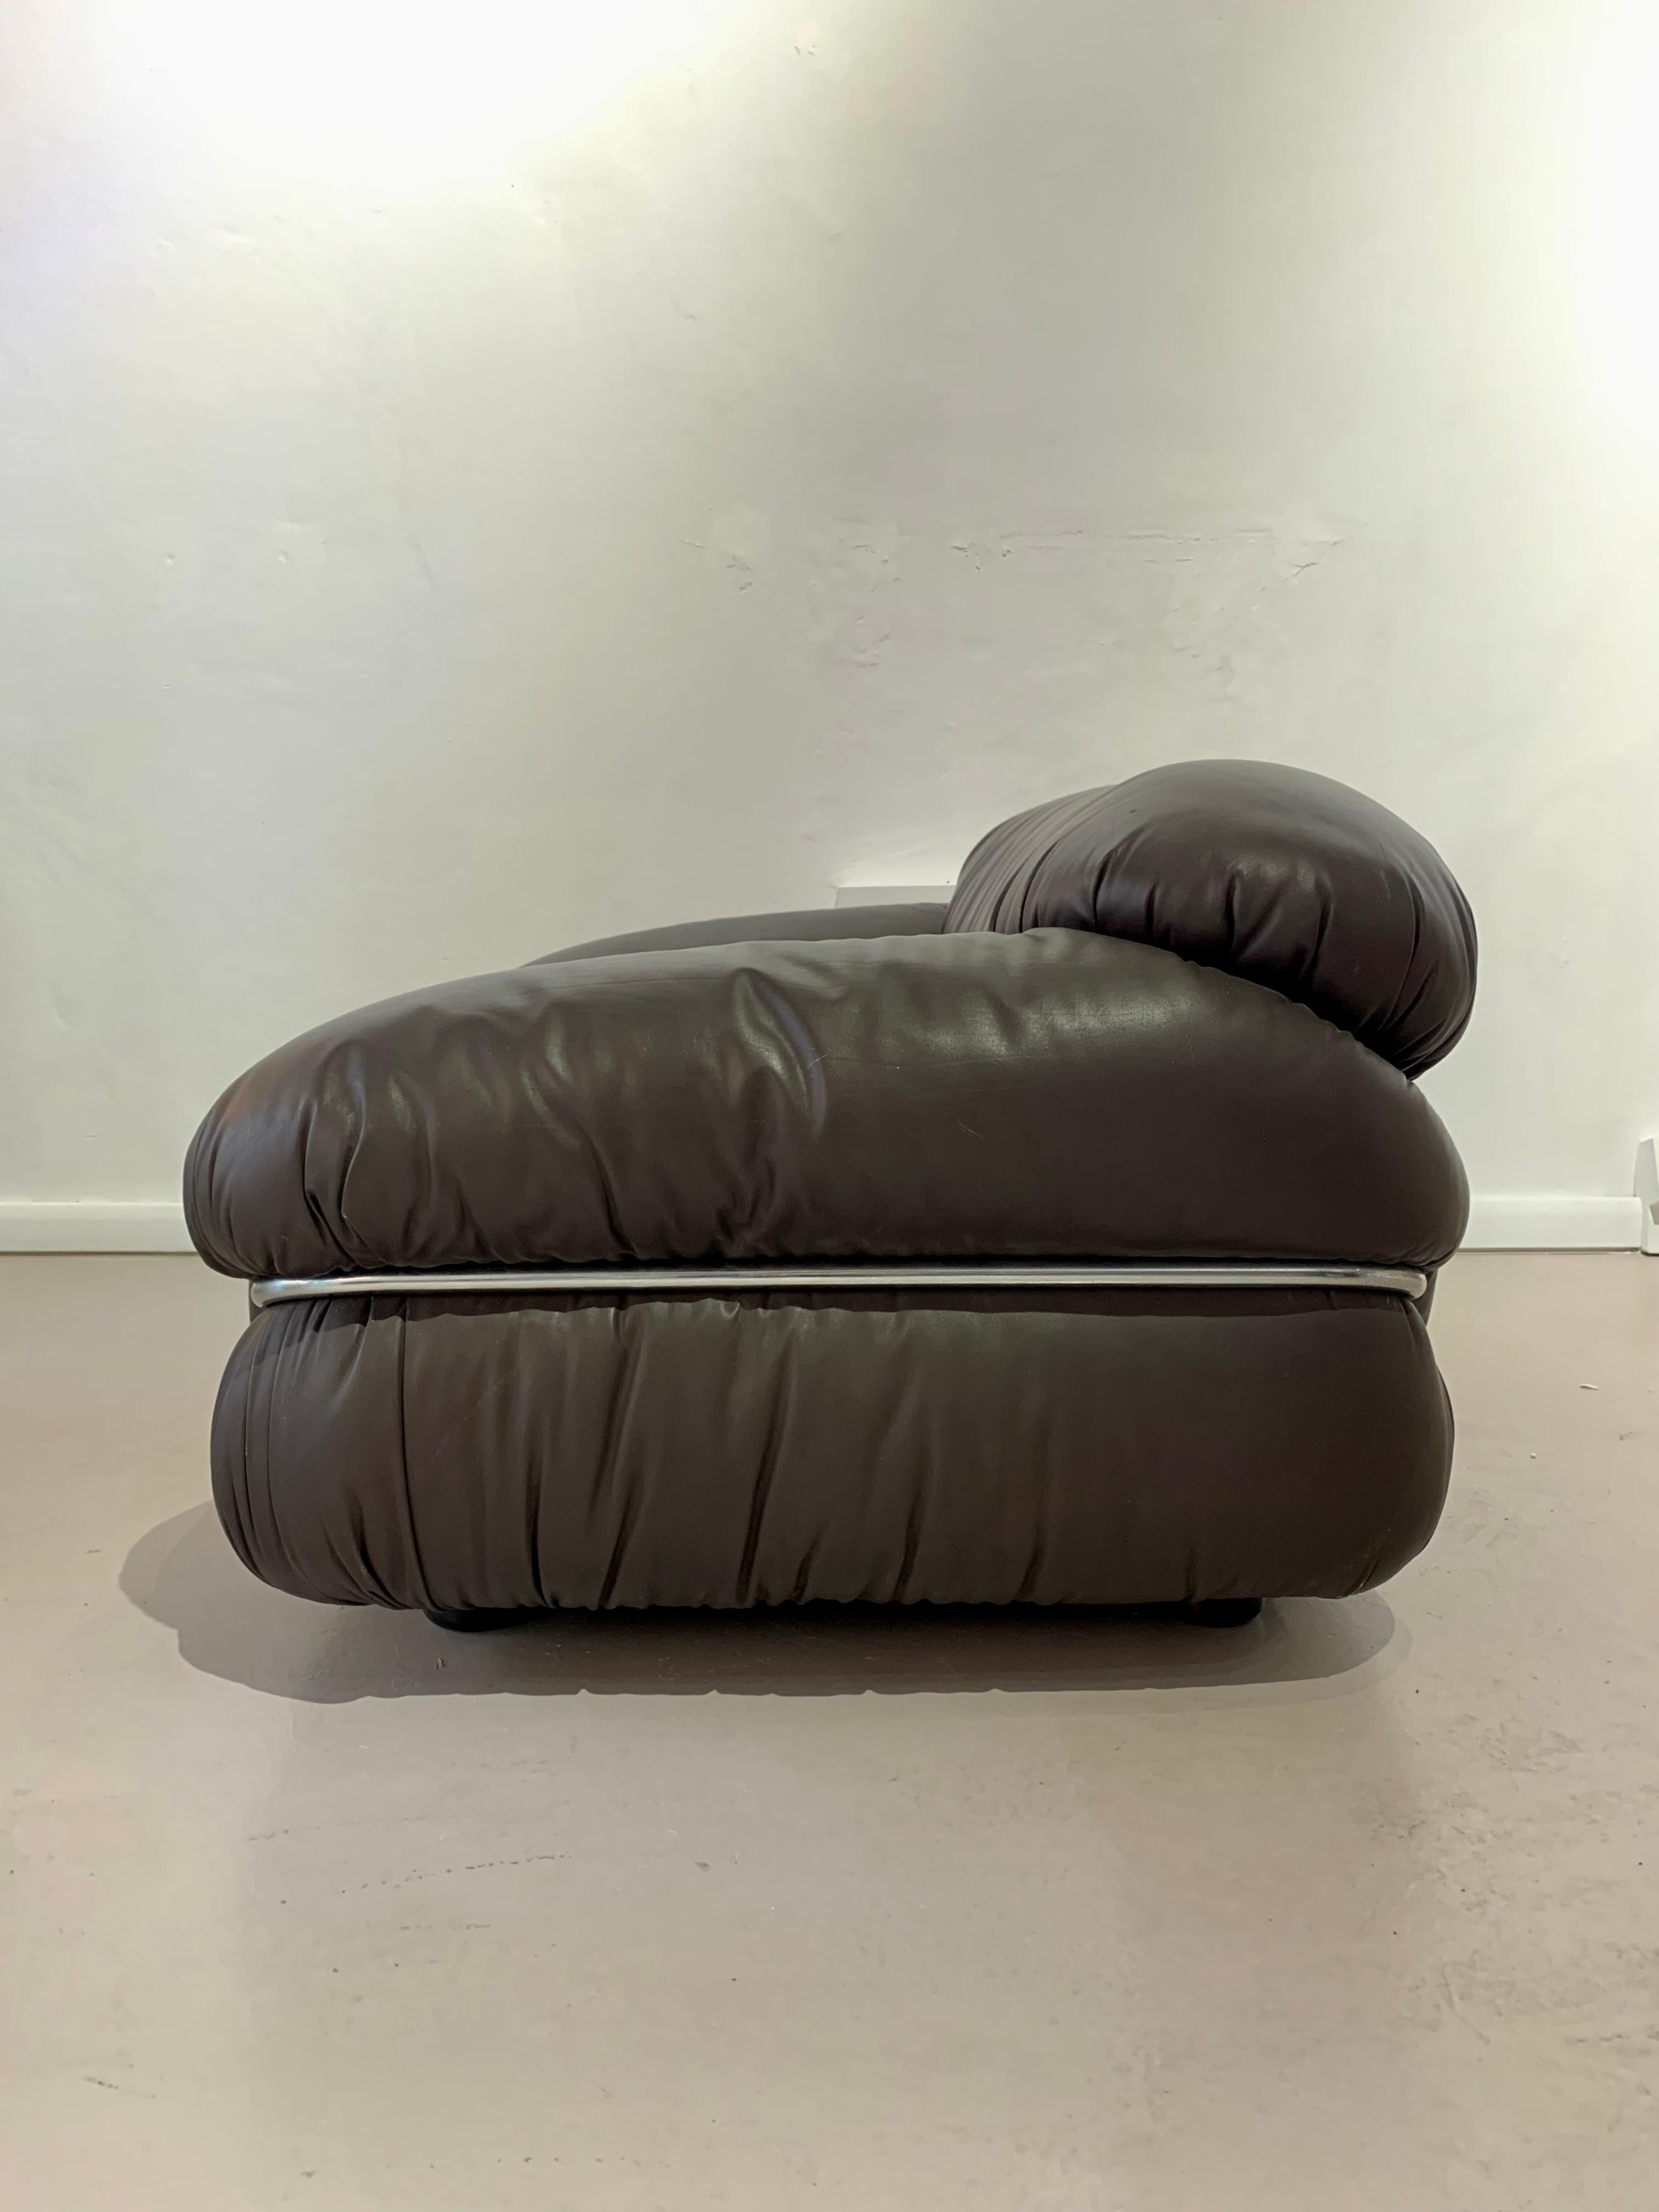 Beautiful Sesann armchair designed by Gianfranco Frattini and produced by Cassina, Italy 1969.
Very beautiful dark brown leather, in excellent condition, very slight signs of wear consistent with age that enhance its charm, chromed metal tubular